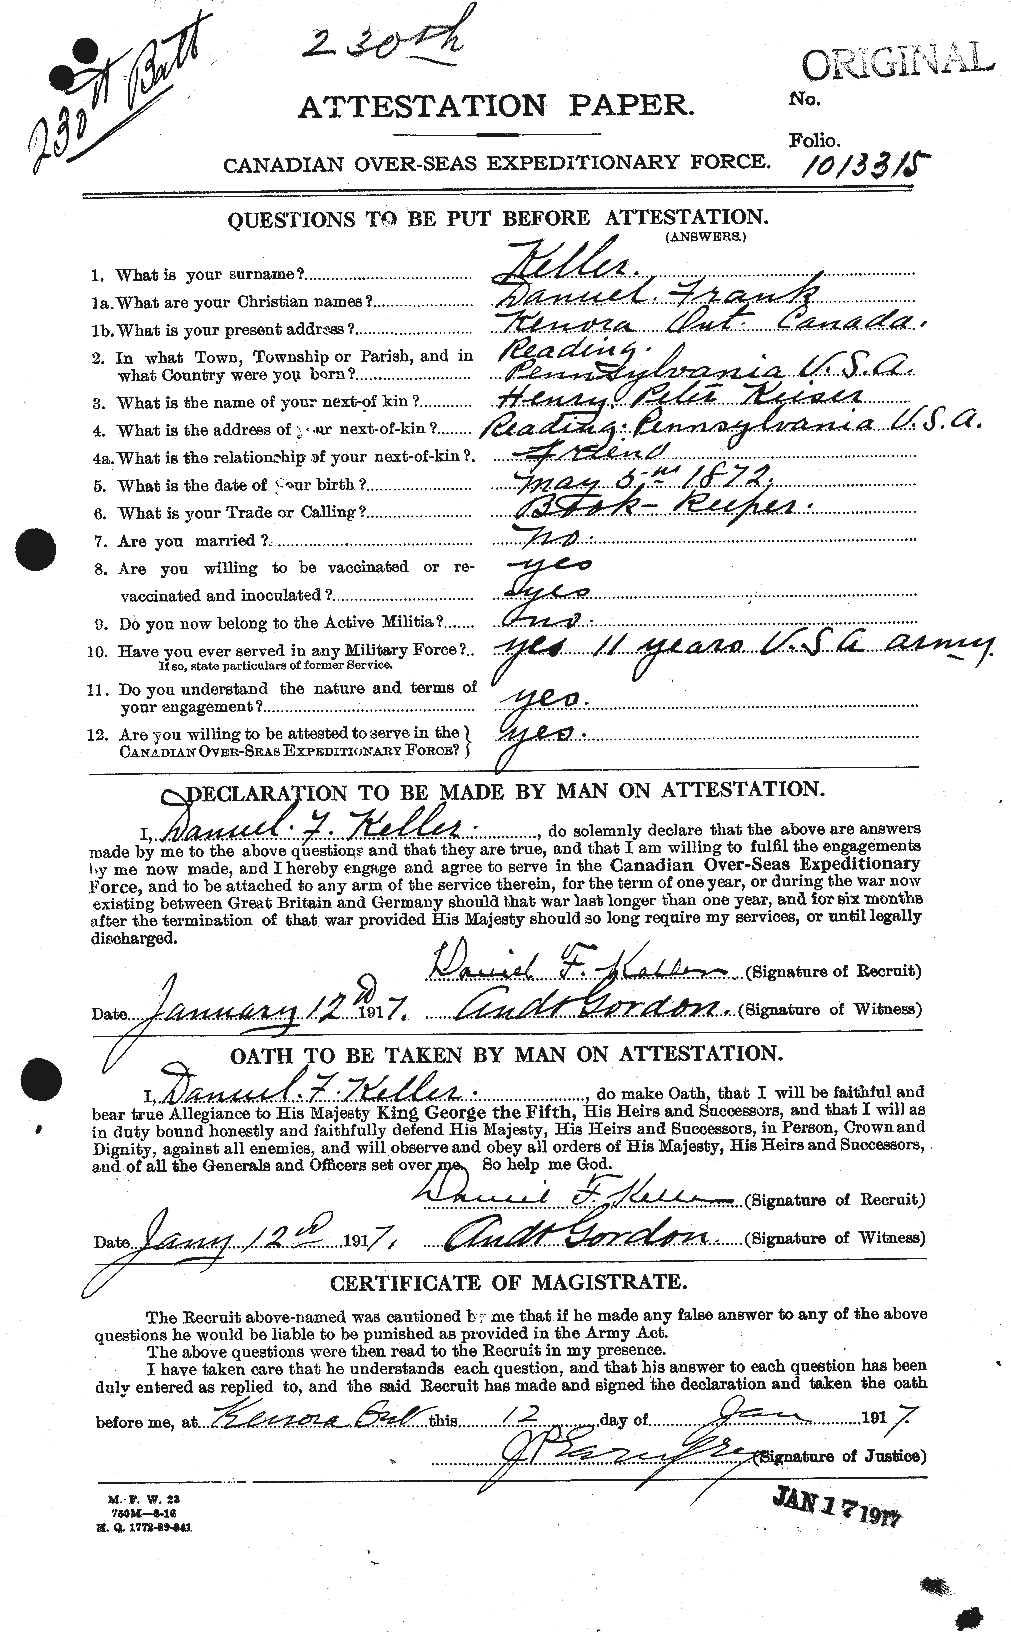 Personnel Records of the First World War - CEF 434180a